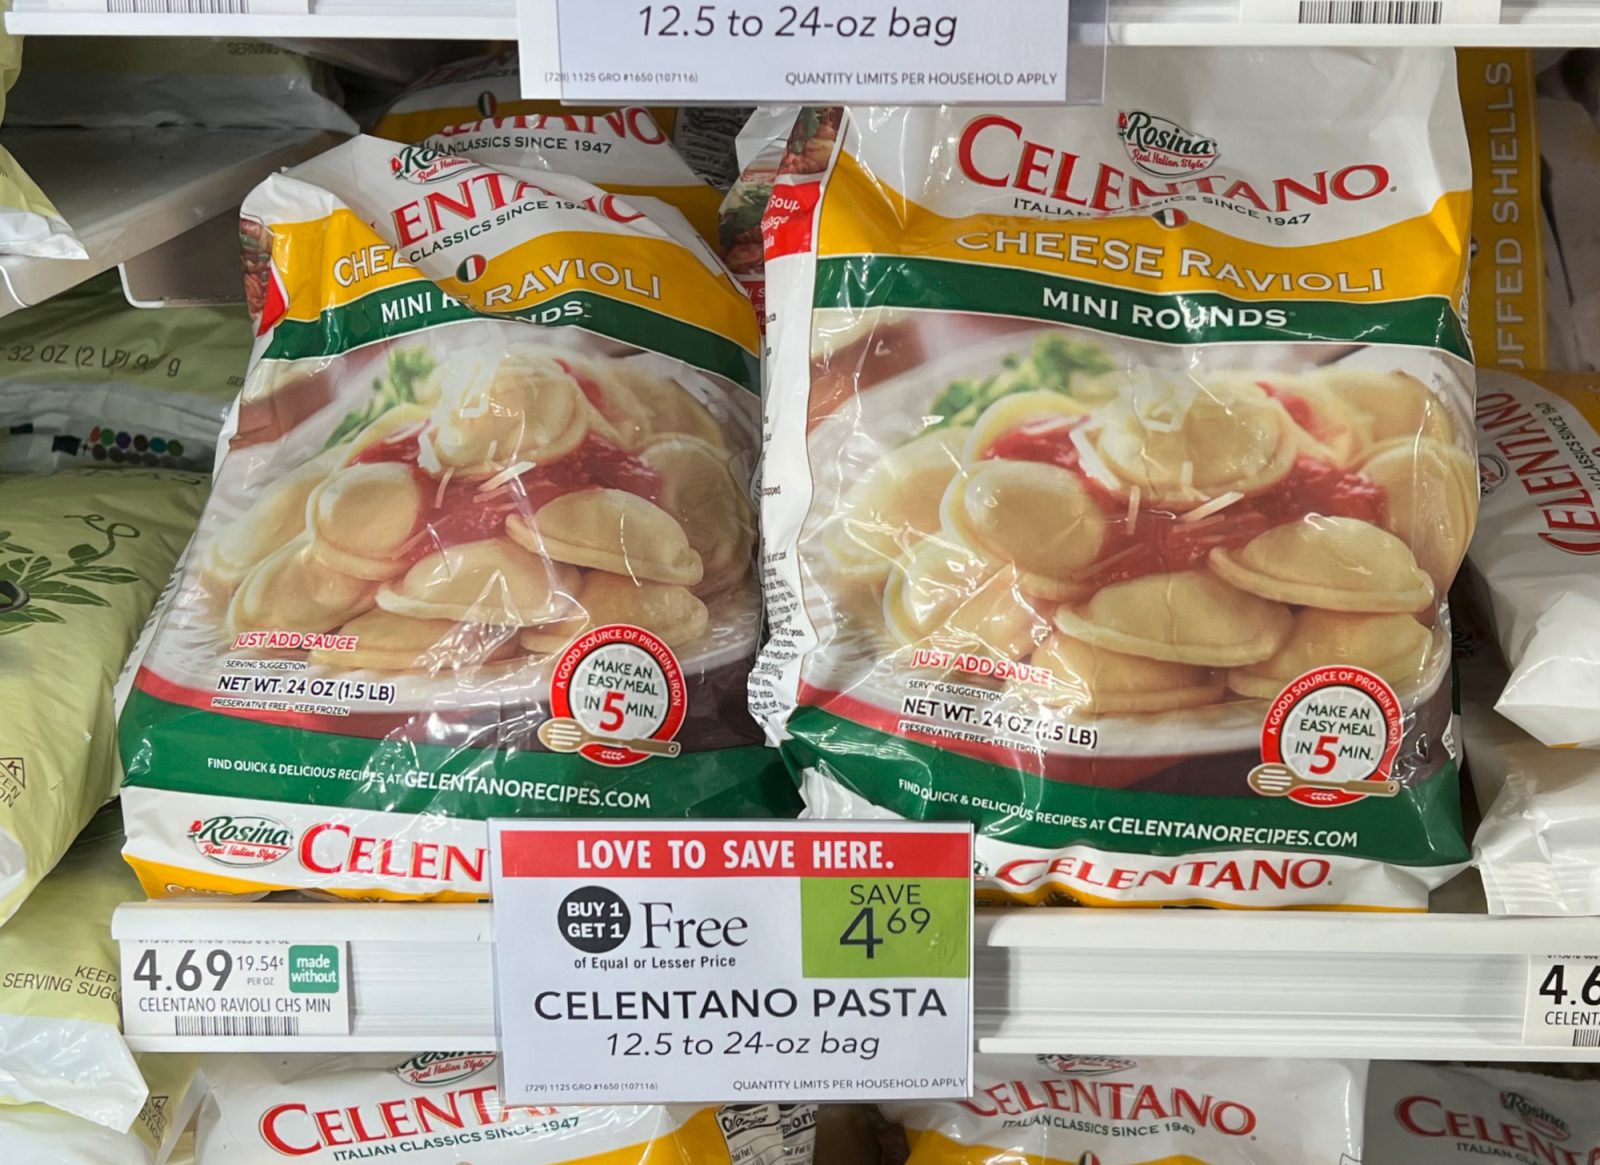 Celentano Pasta As Low As 1.10 With New Digital Coupon iHeartPublix